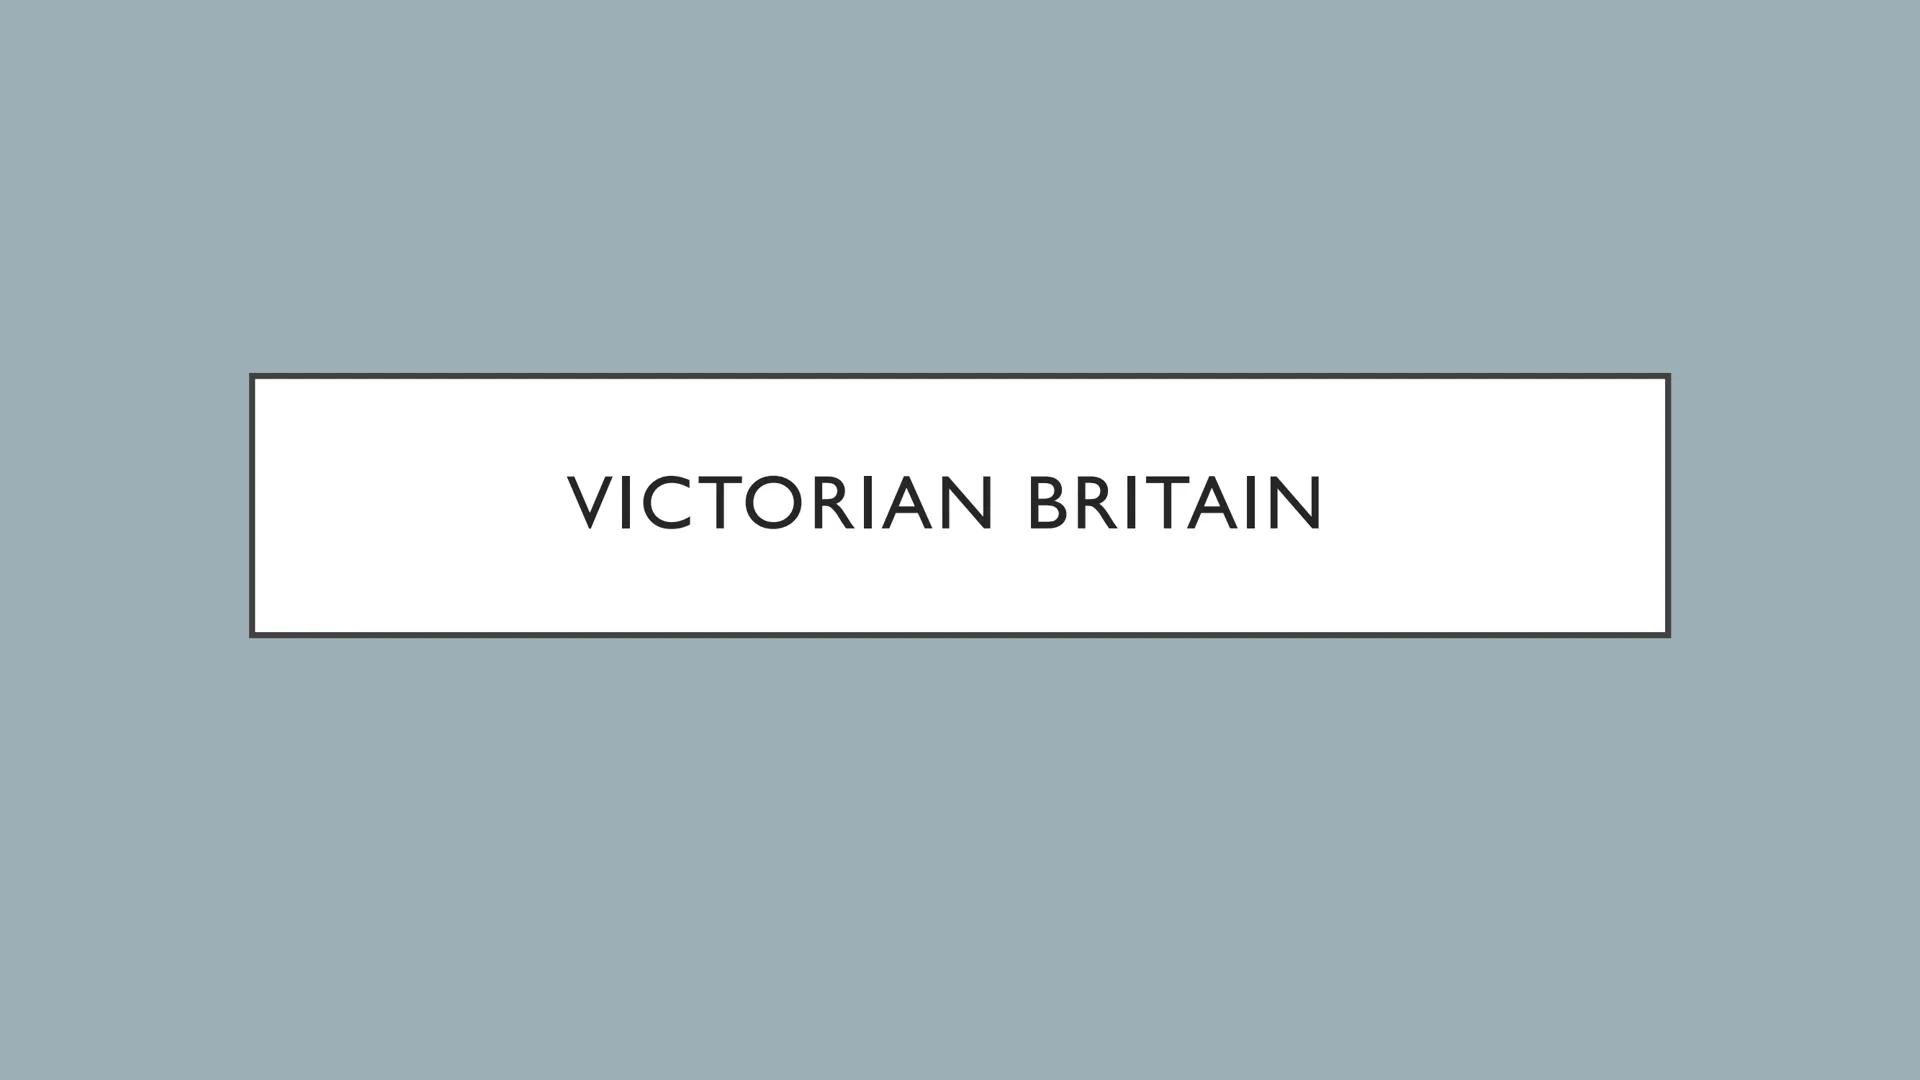 VICTORIAN BRITAIN OVERVIEW
70
TADID
Queen Victoria
Victorian Era
●
●
Society
Religion and Science
Politics
The Industrial Revolution
●
What 